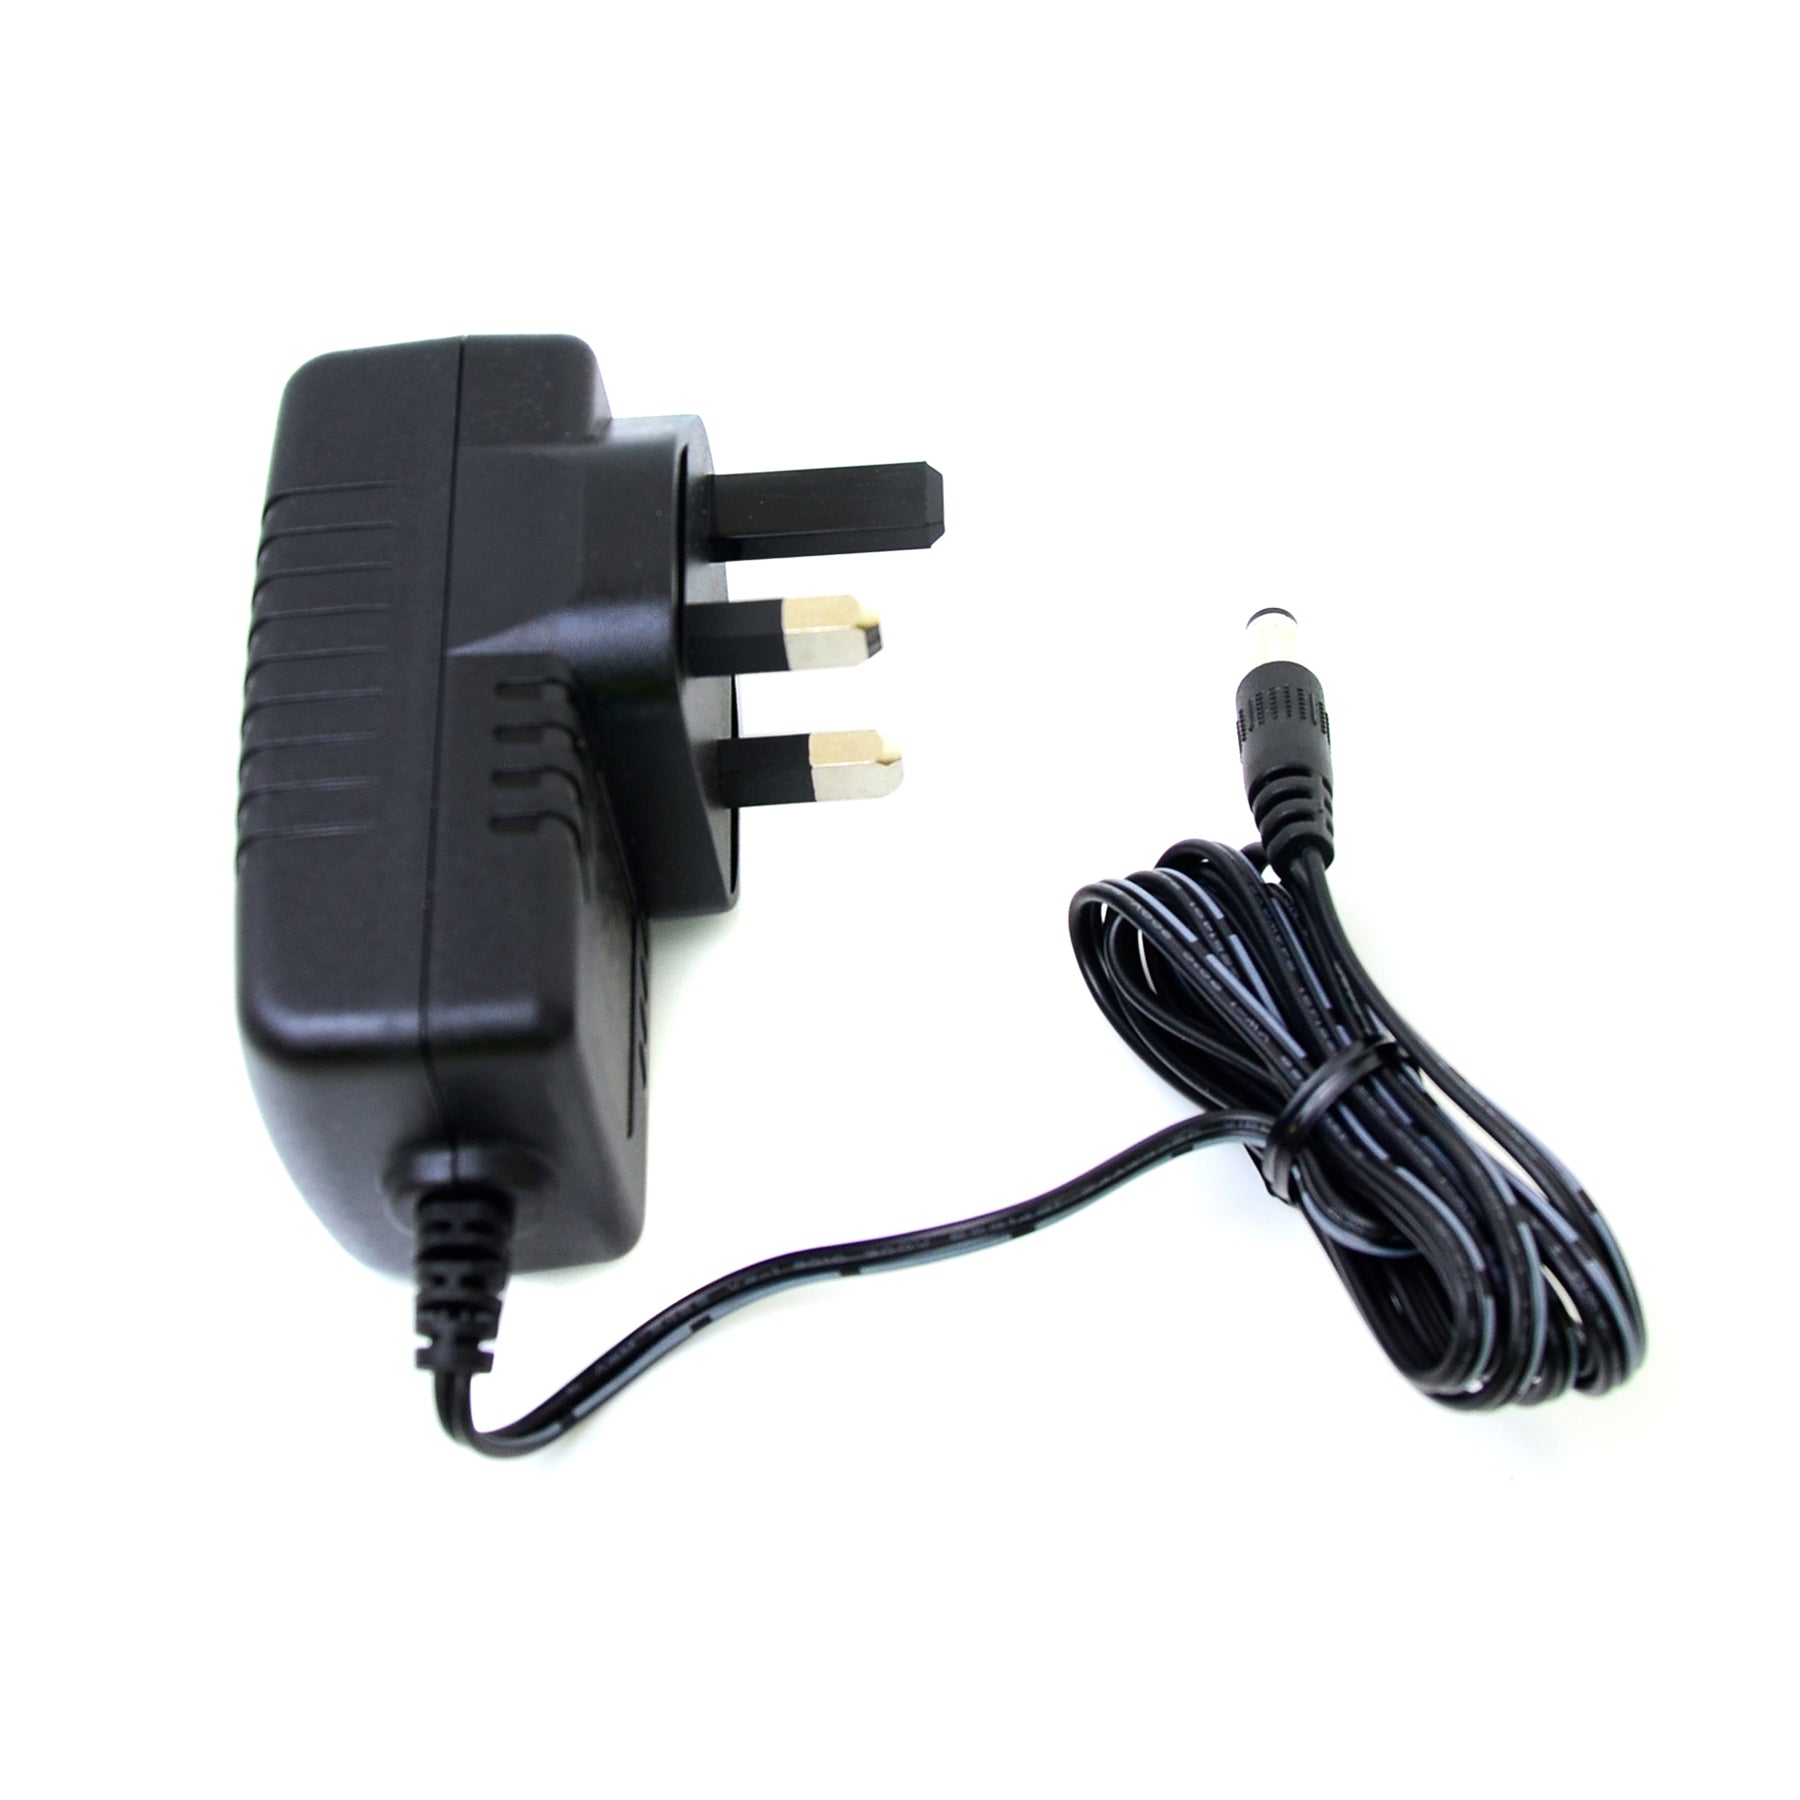 G.W.S LED Wholesale LED Drivers/LED Power Supplies IP20 (Non-Waterproof) / 24V / 24W 24V 1A 24W LED Power Adapter